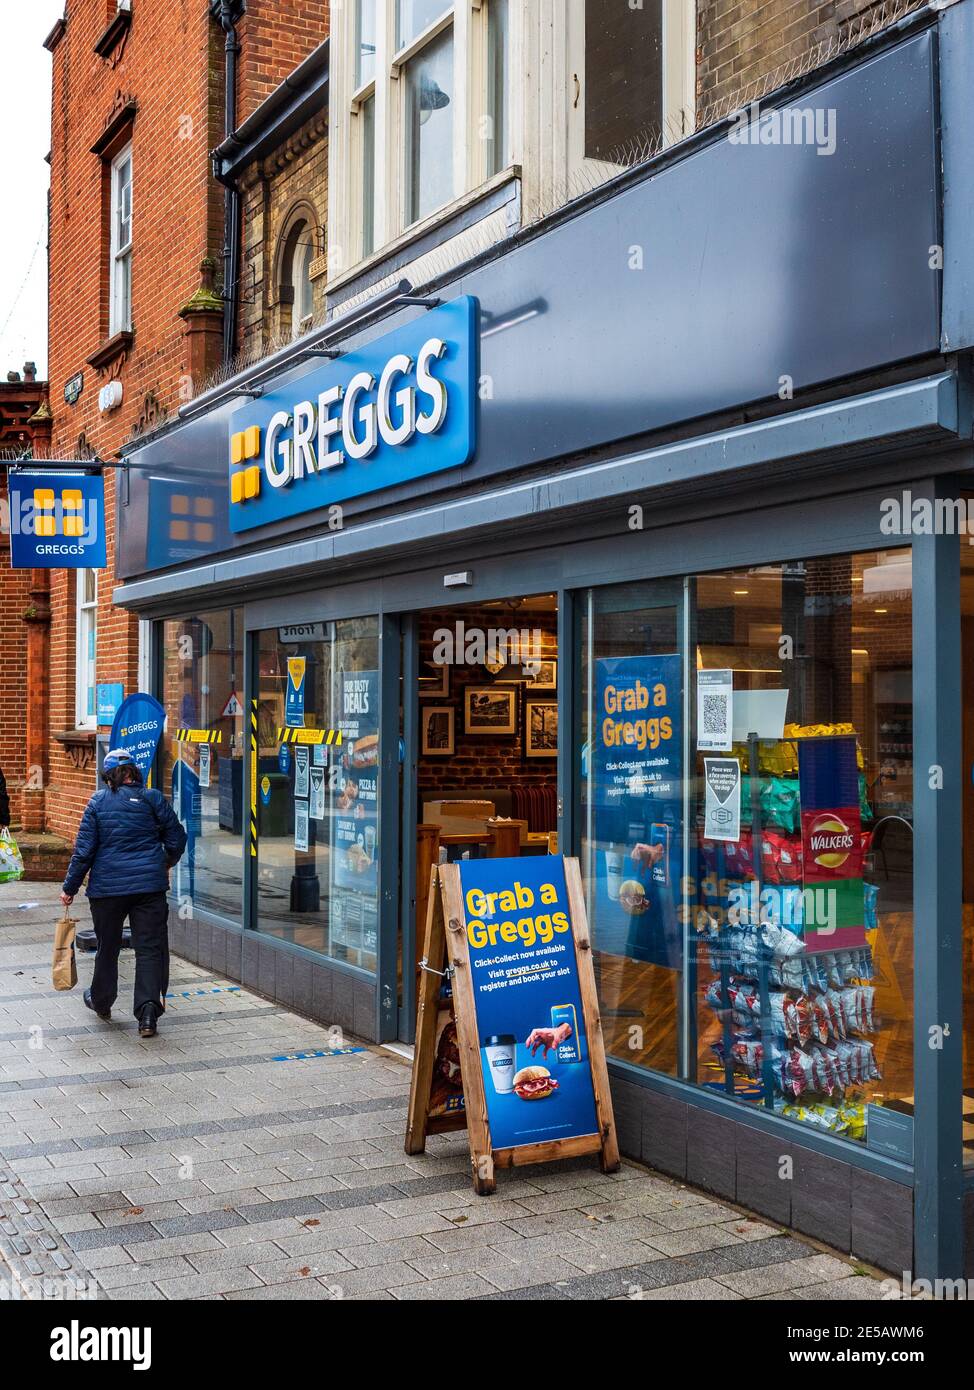 Greggs Bakery - Greggs Cafe and Bakery Food Store in Felixstowe Royaume-Uni Banque D'Images